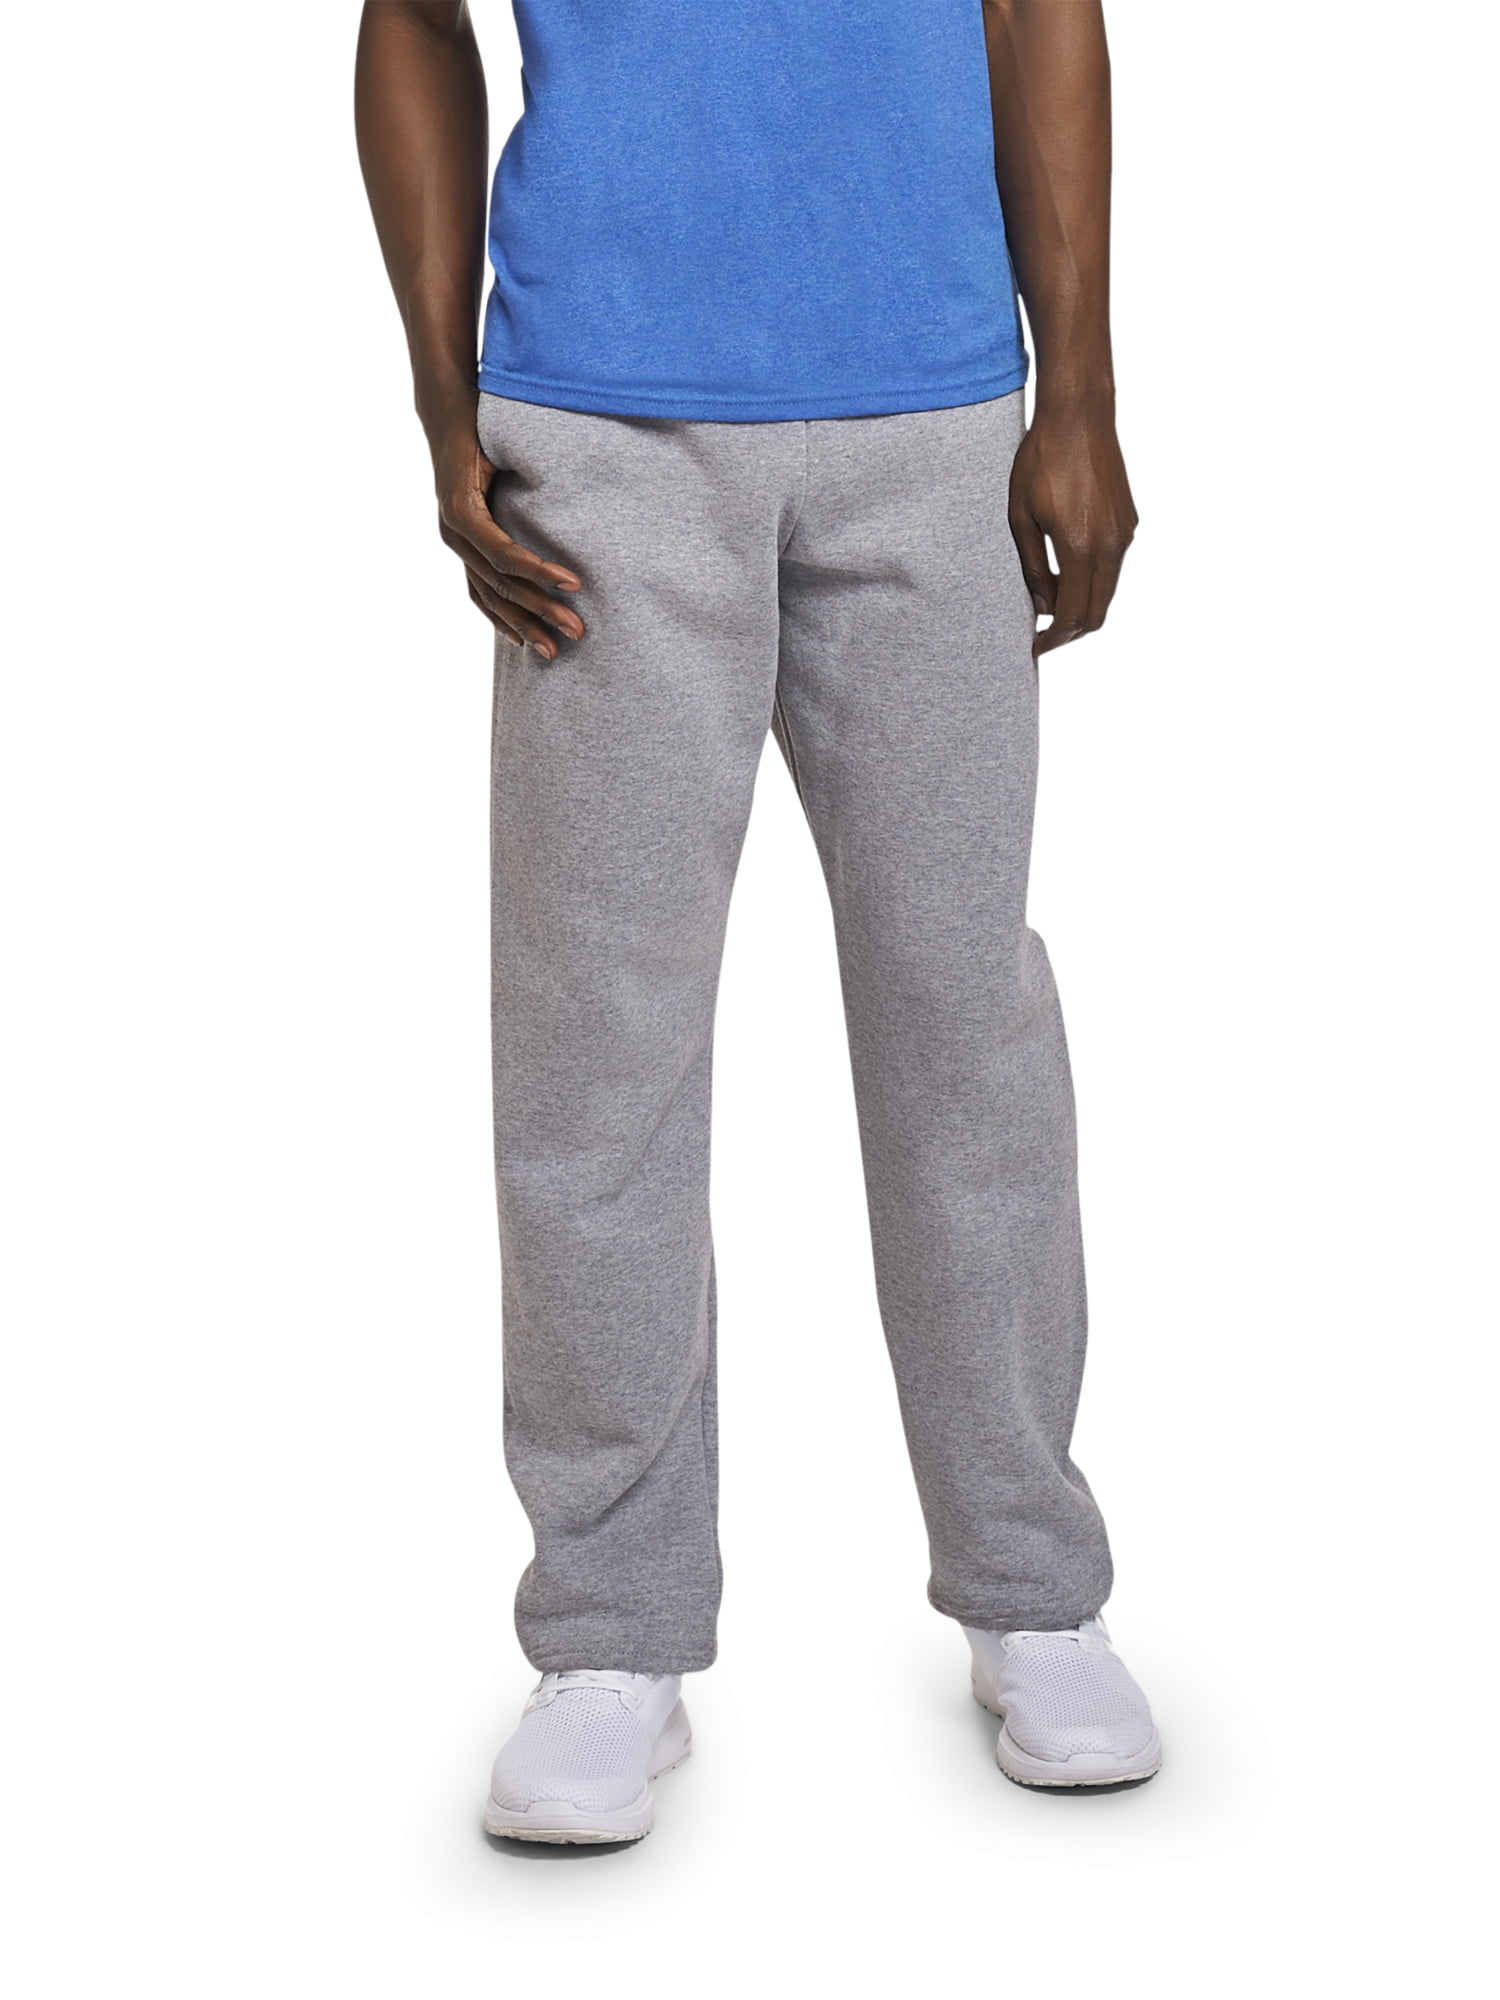 Pntalones para Correr Hombre Russell Athletic Dri-Power Open Bottom Sweatpants with Pockets 